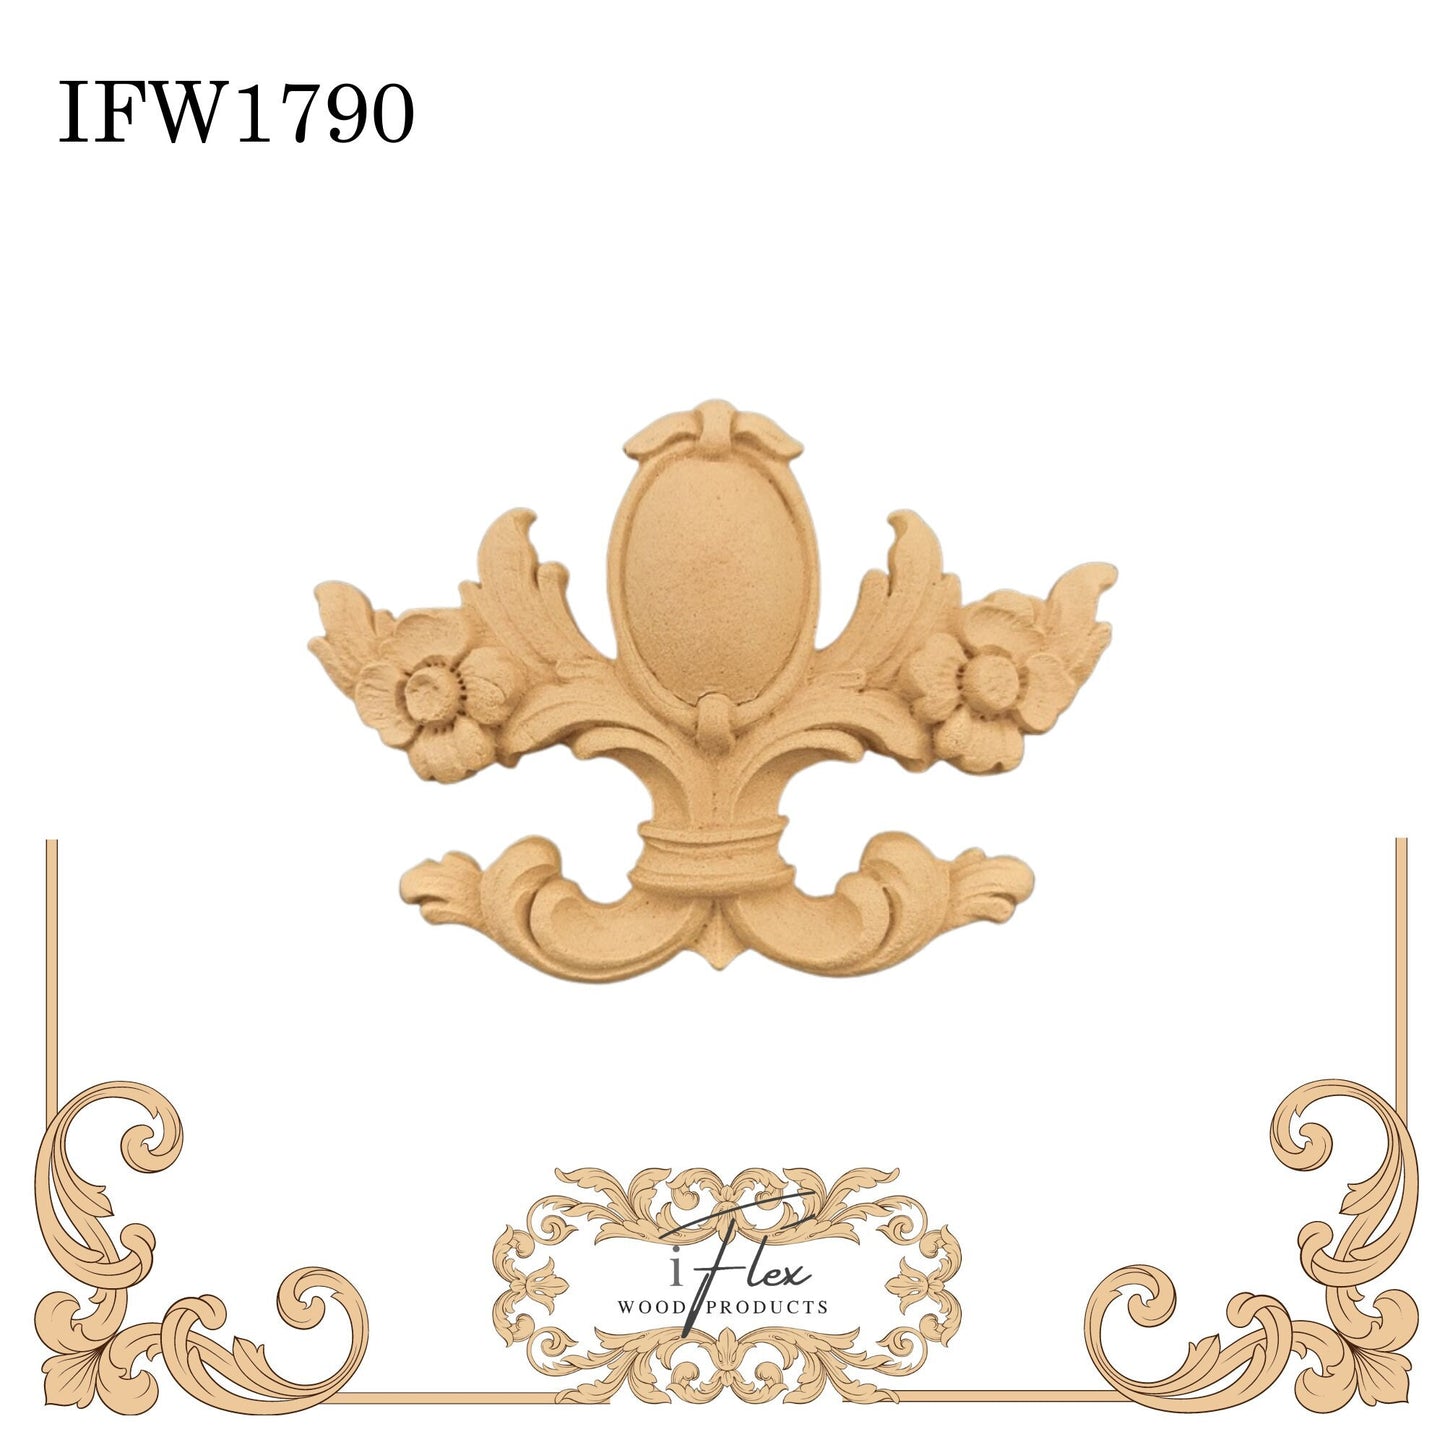 IFW 1790 iFlex Wood Products, bendable mouldings, flexible, wooden appliques, plume